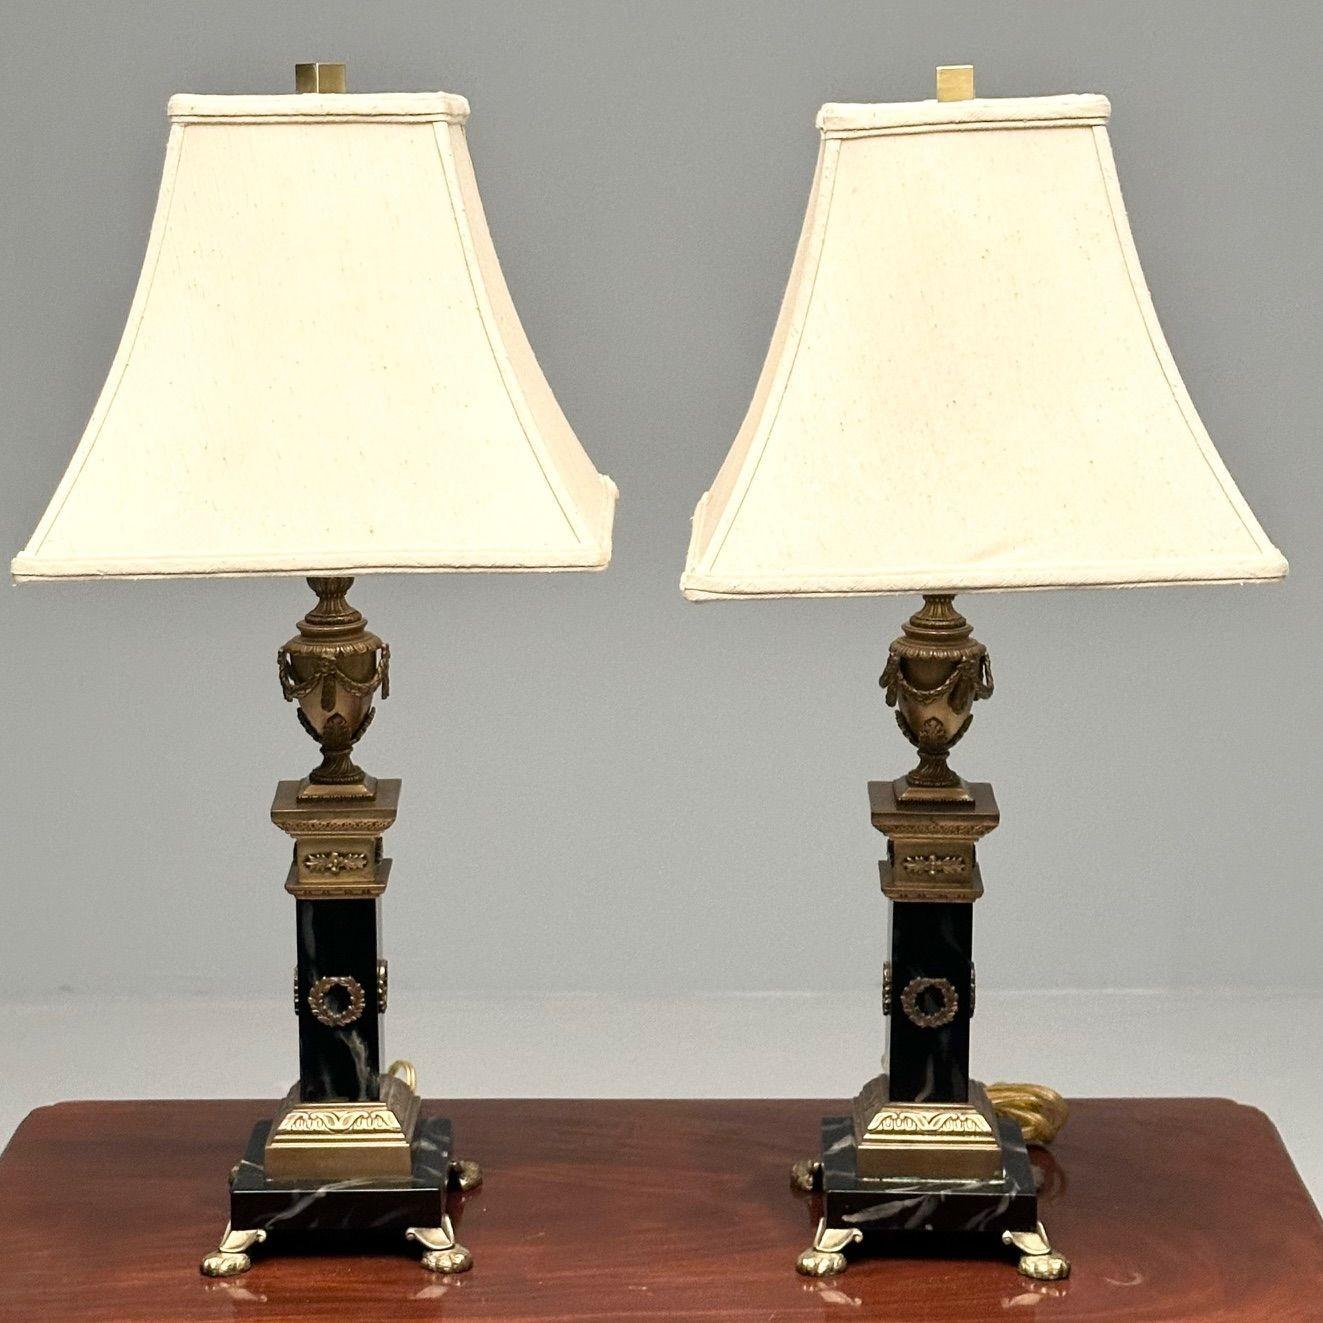 Pair of Hollywood Regency Bronze and Marble Table Lamps, Corinthian Column Form

A sweet stylish pair of bronze and marble table lamps, each having a Corinthian column form with wreath and leaf design in bronze on claw feet pedestals. The pair with